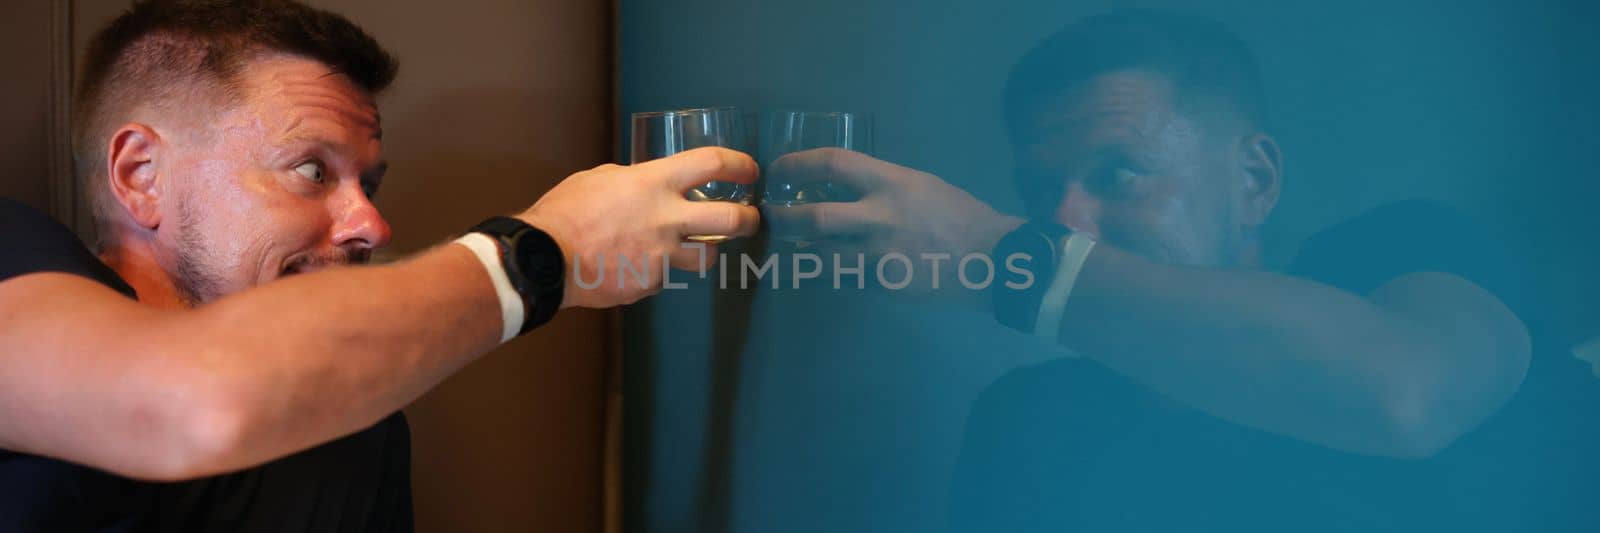 Man drinking whiskey with his reflection in mirror. Alcohol addiction concept